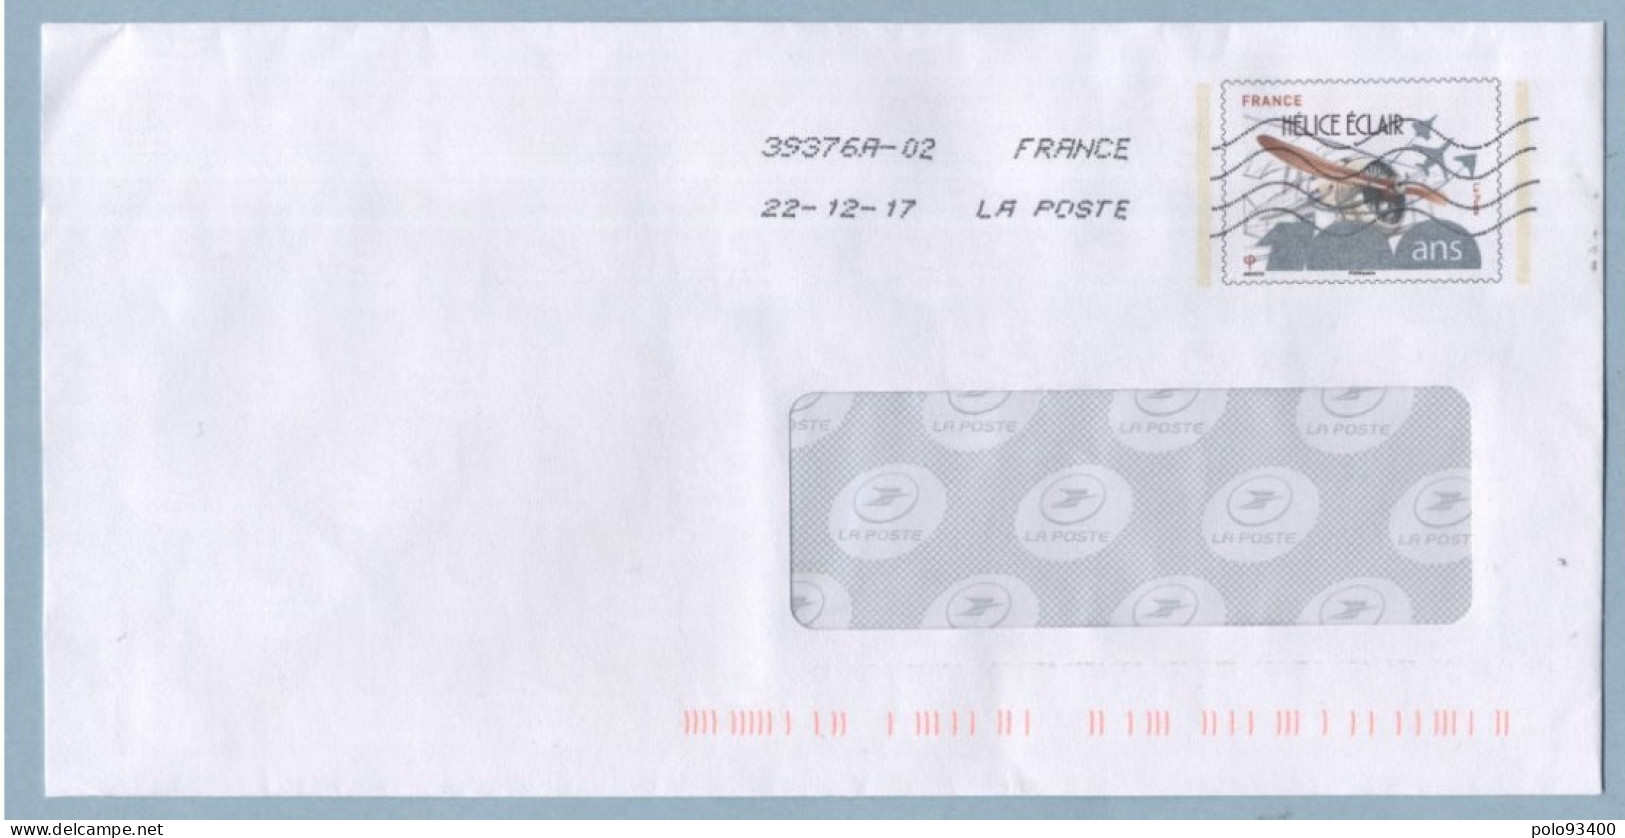 HÉLICE ECLAIR LOT 16C279 - Prêts-à-poster:Stamped On Demand & Semi-official Overprinting (1995-...)